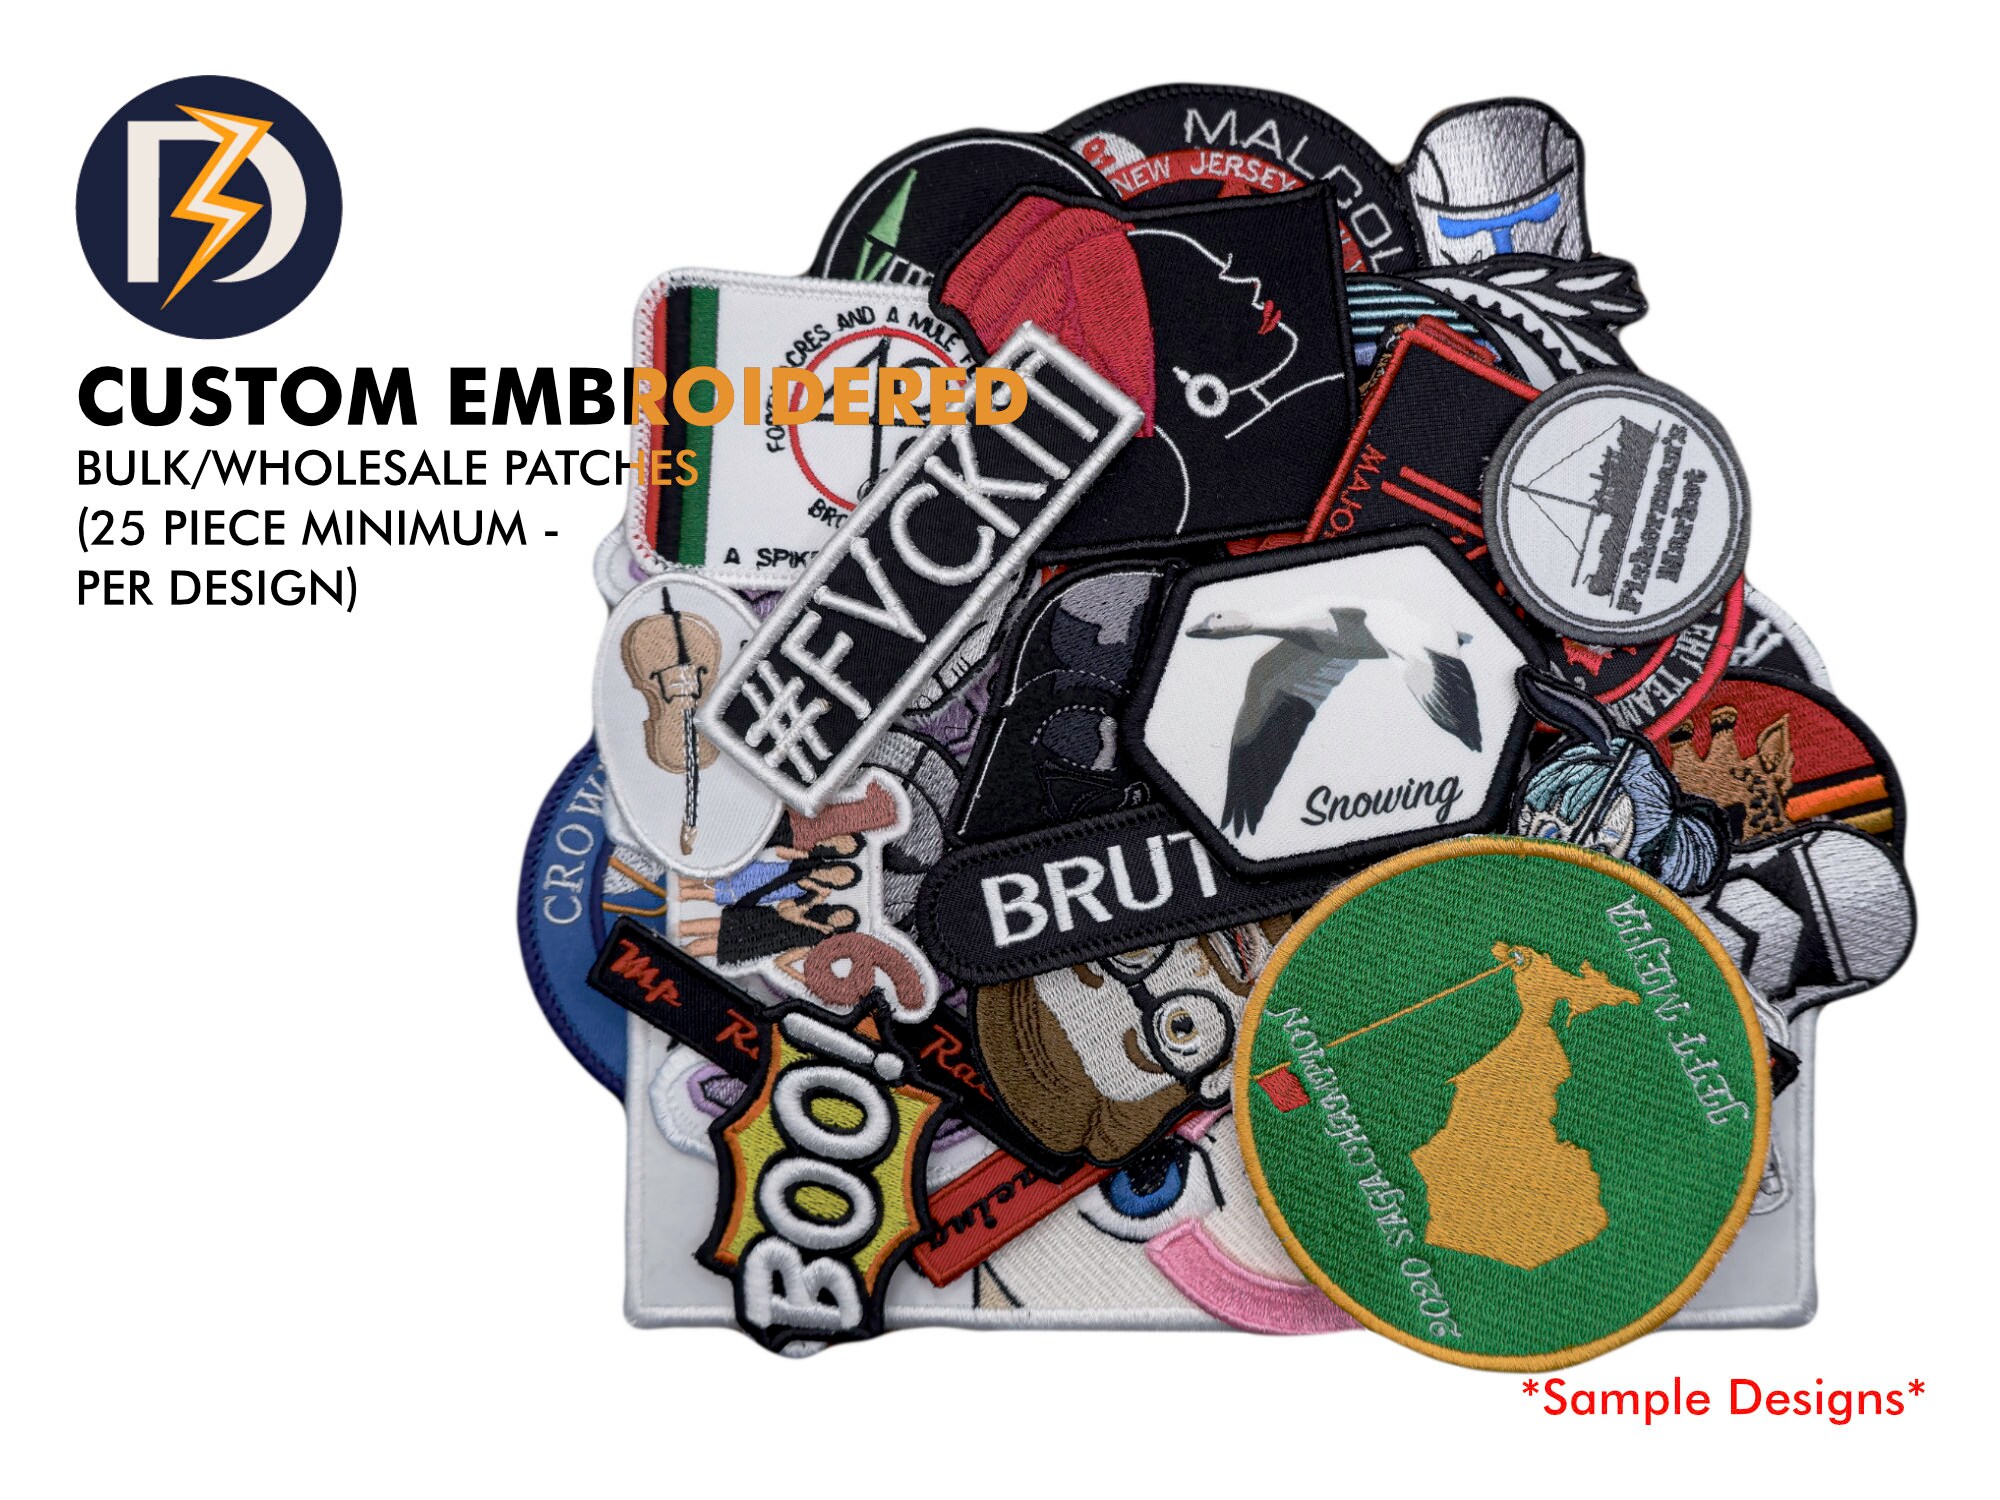 50 Sublimation Patches, Dye Sublimation Patches, Print Patch, Custom  Printed Patches, Patches Printing -  Israel